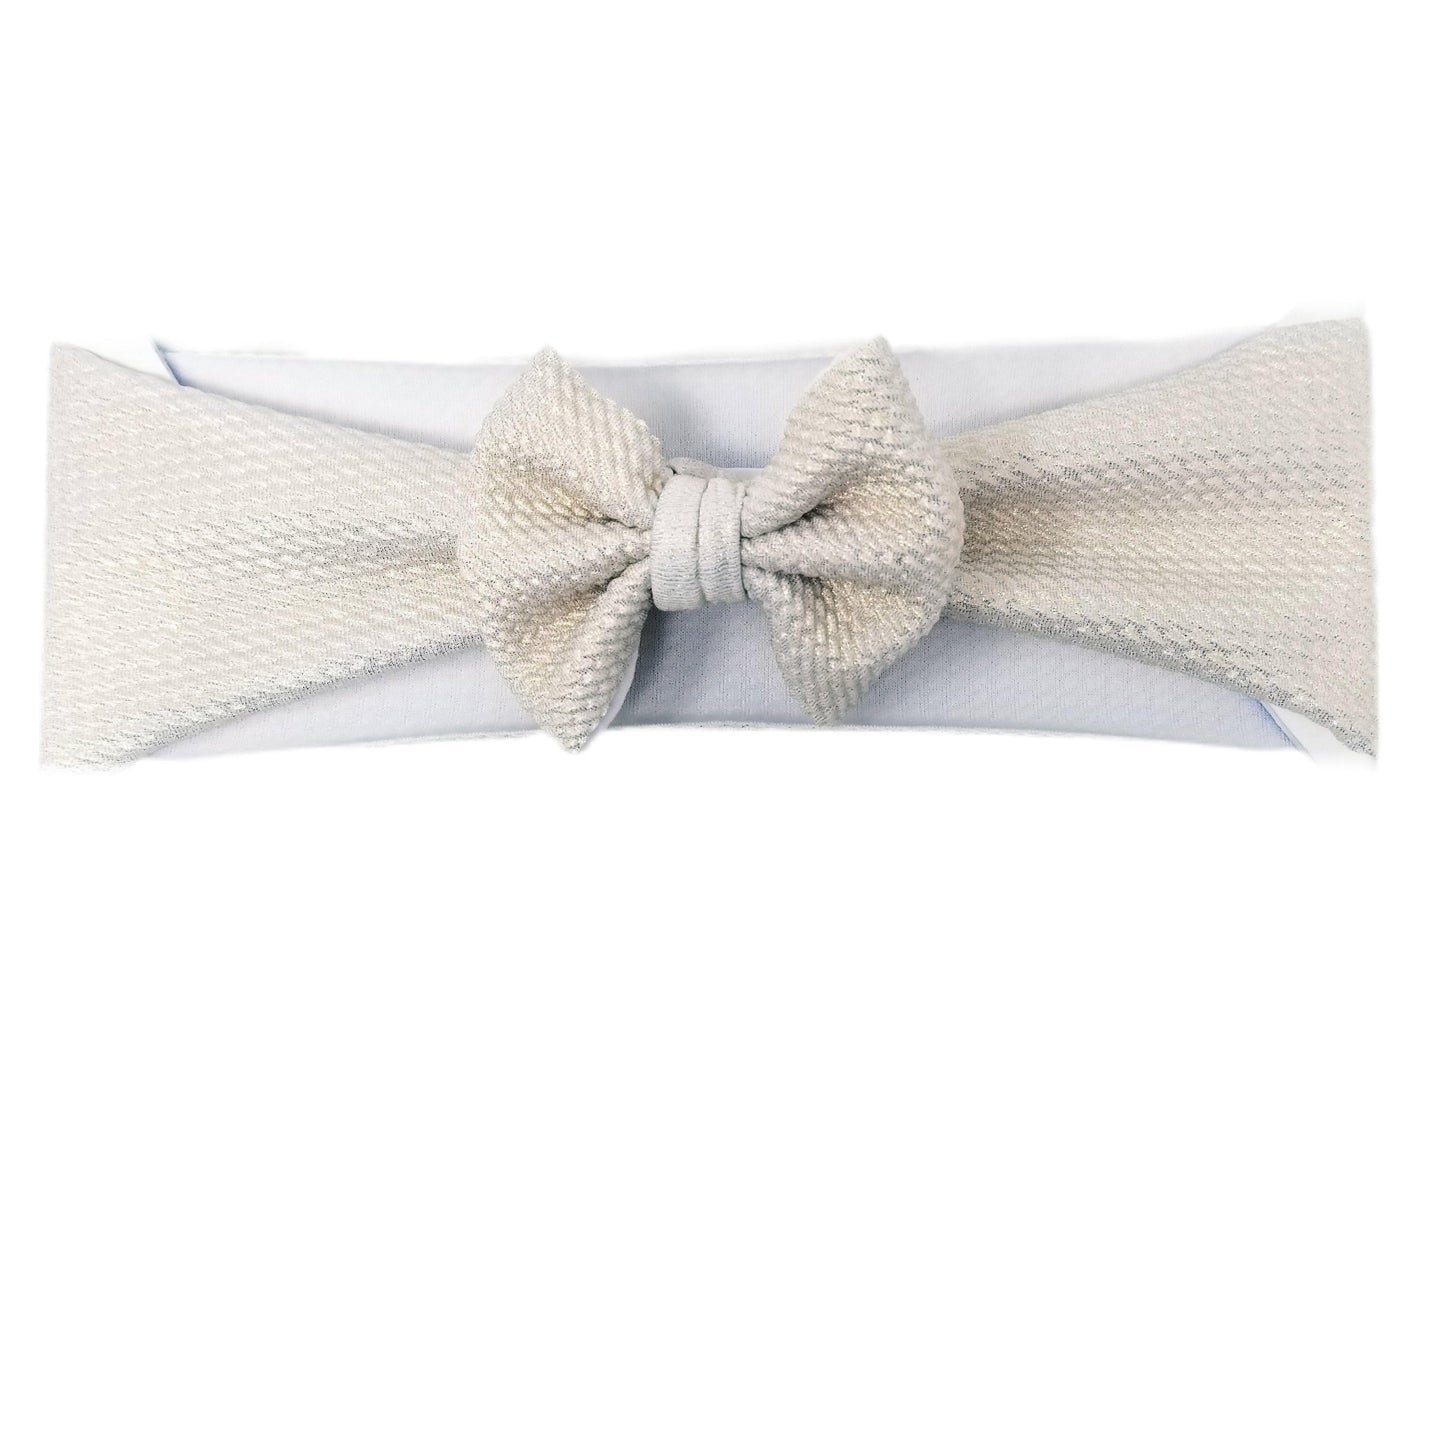 3 inch White Shimmer Fabric Bow Headwrap